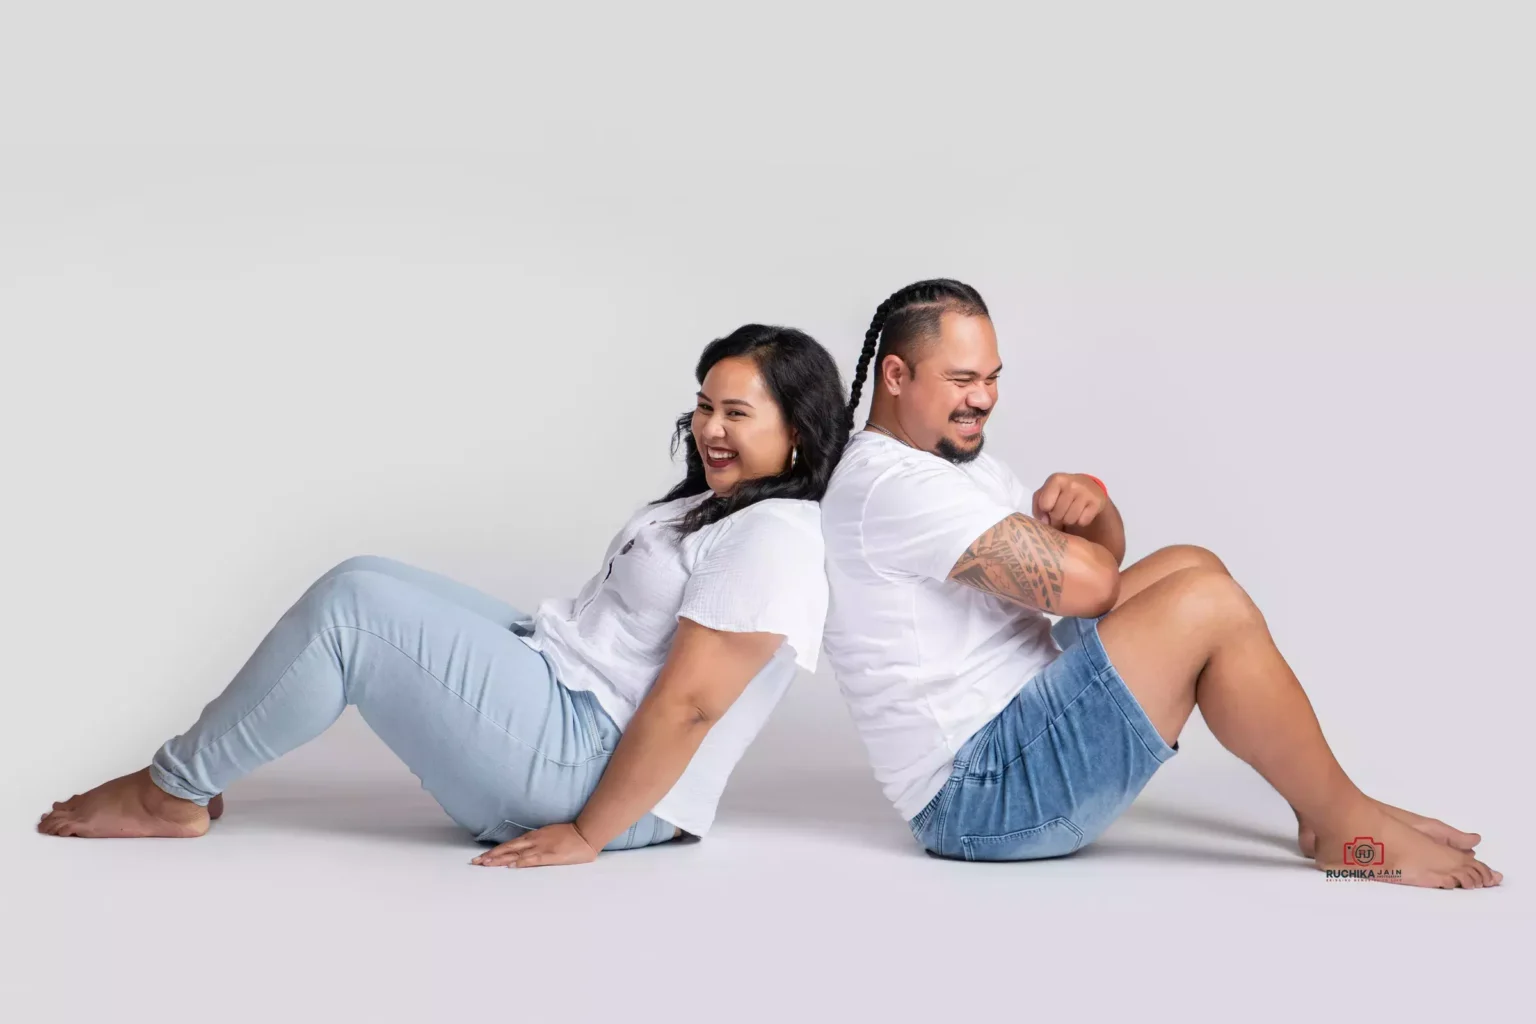 Playful and Healthy husband and wife portrait, having fun together with a serene light grey background - Dress for Family Photoshoot Guide